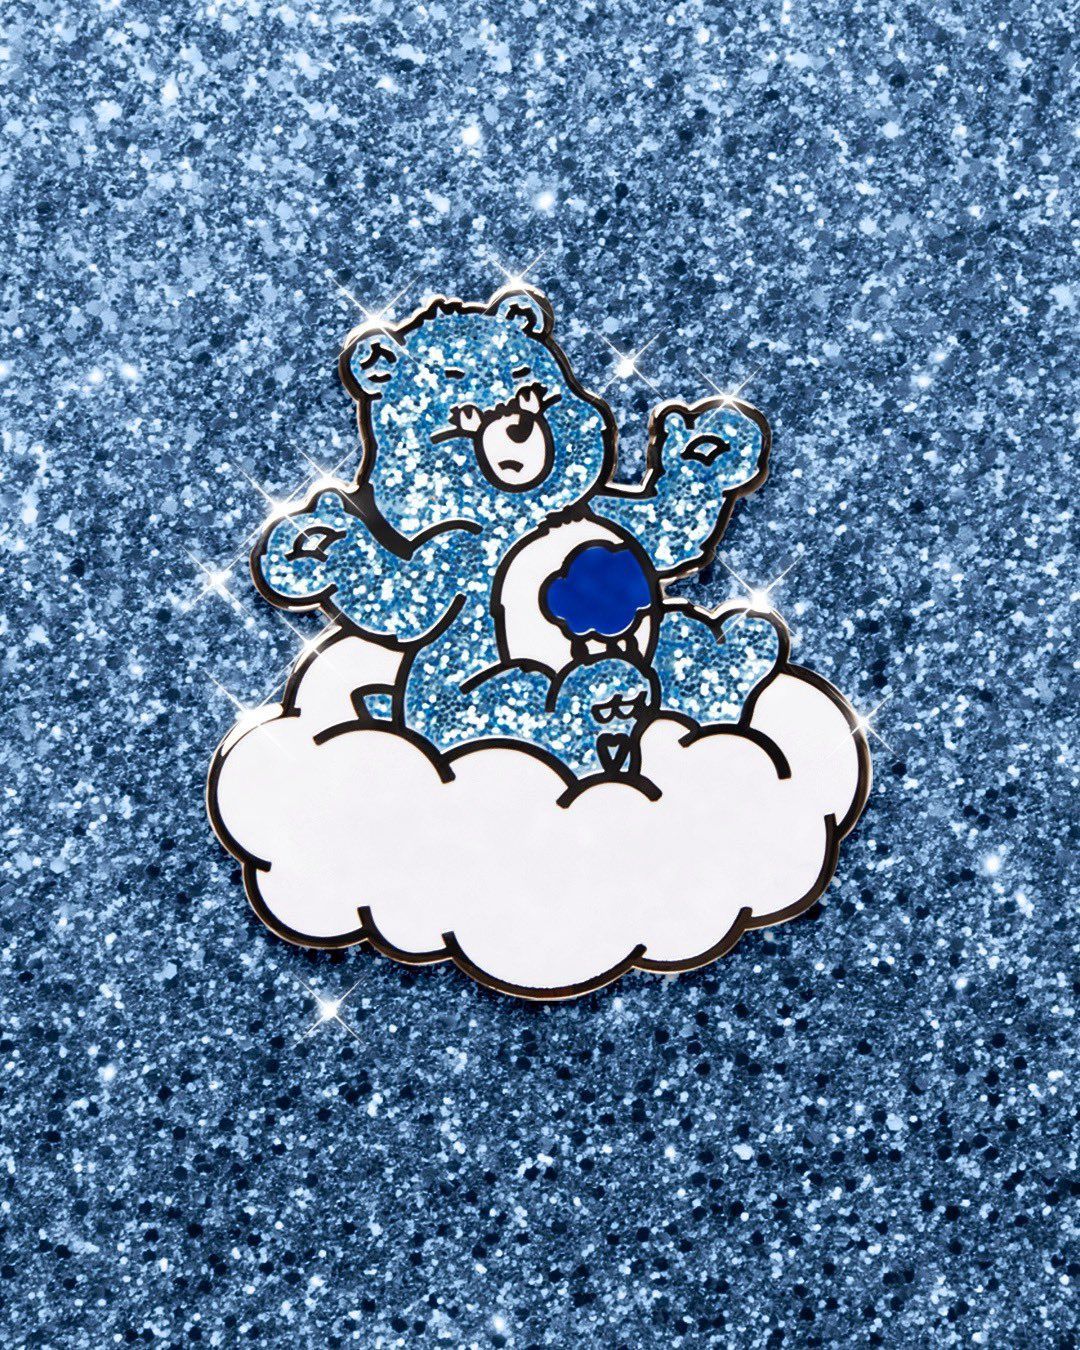 TF x Care Bears Silver Plated Enamel Pins still in stock!